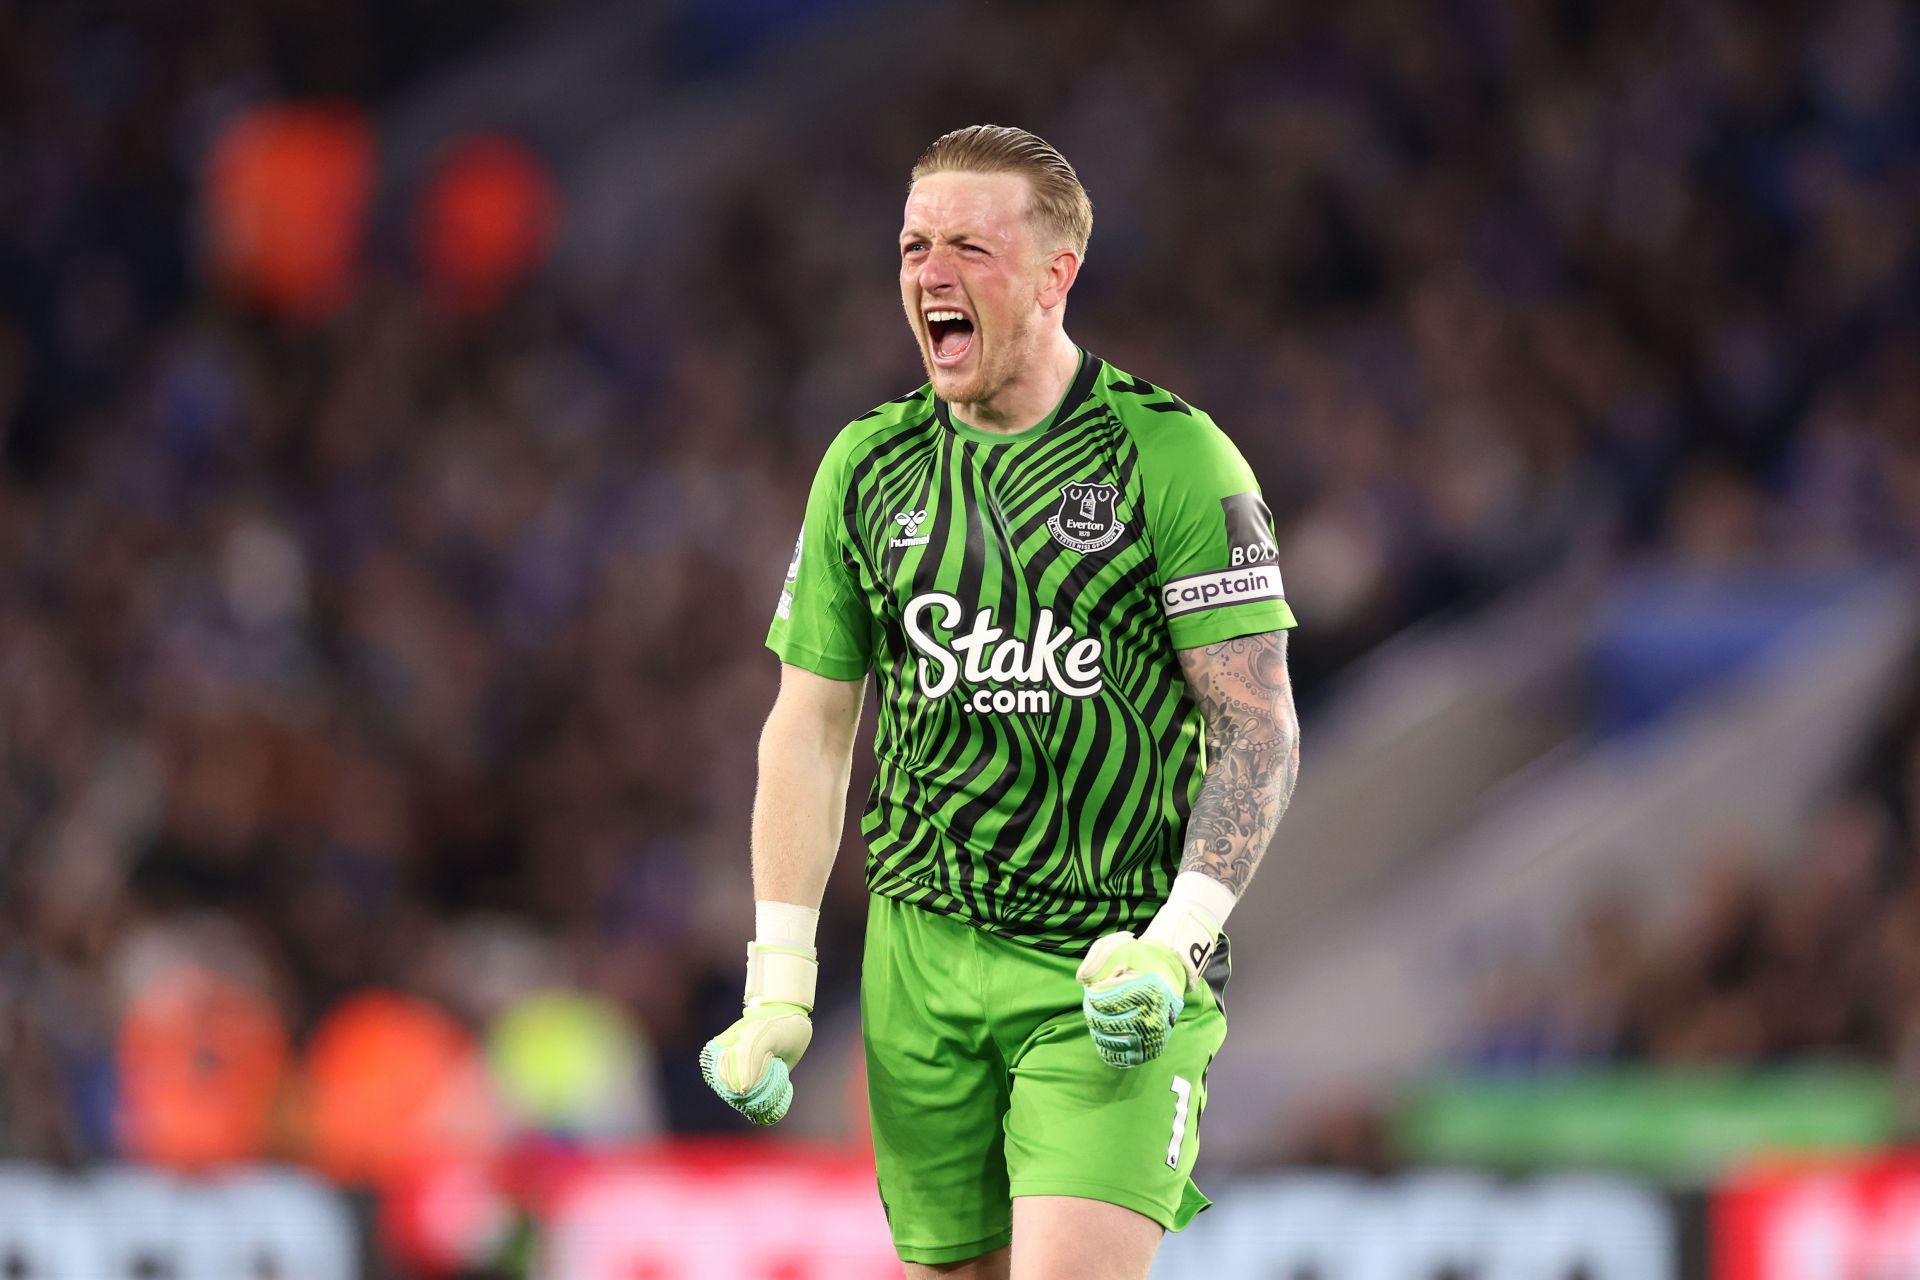 Pickford is another goalkeeper under consideration.